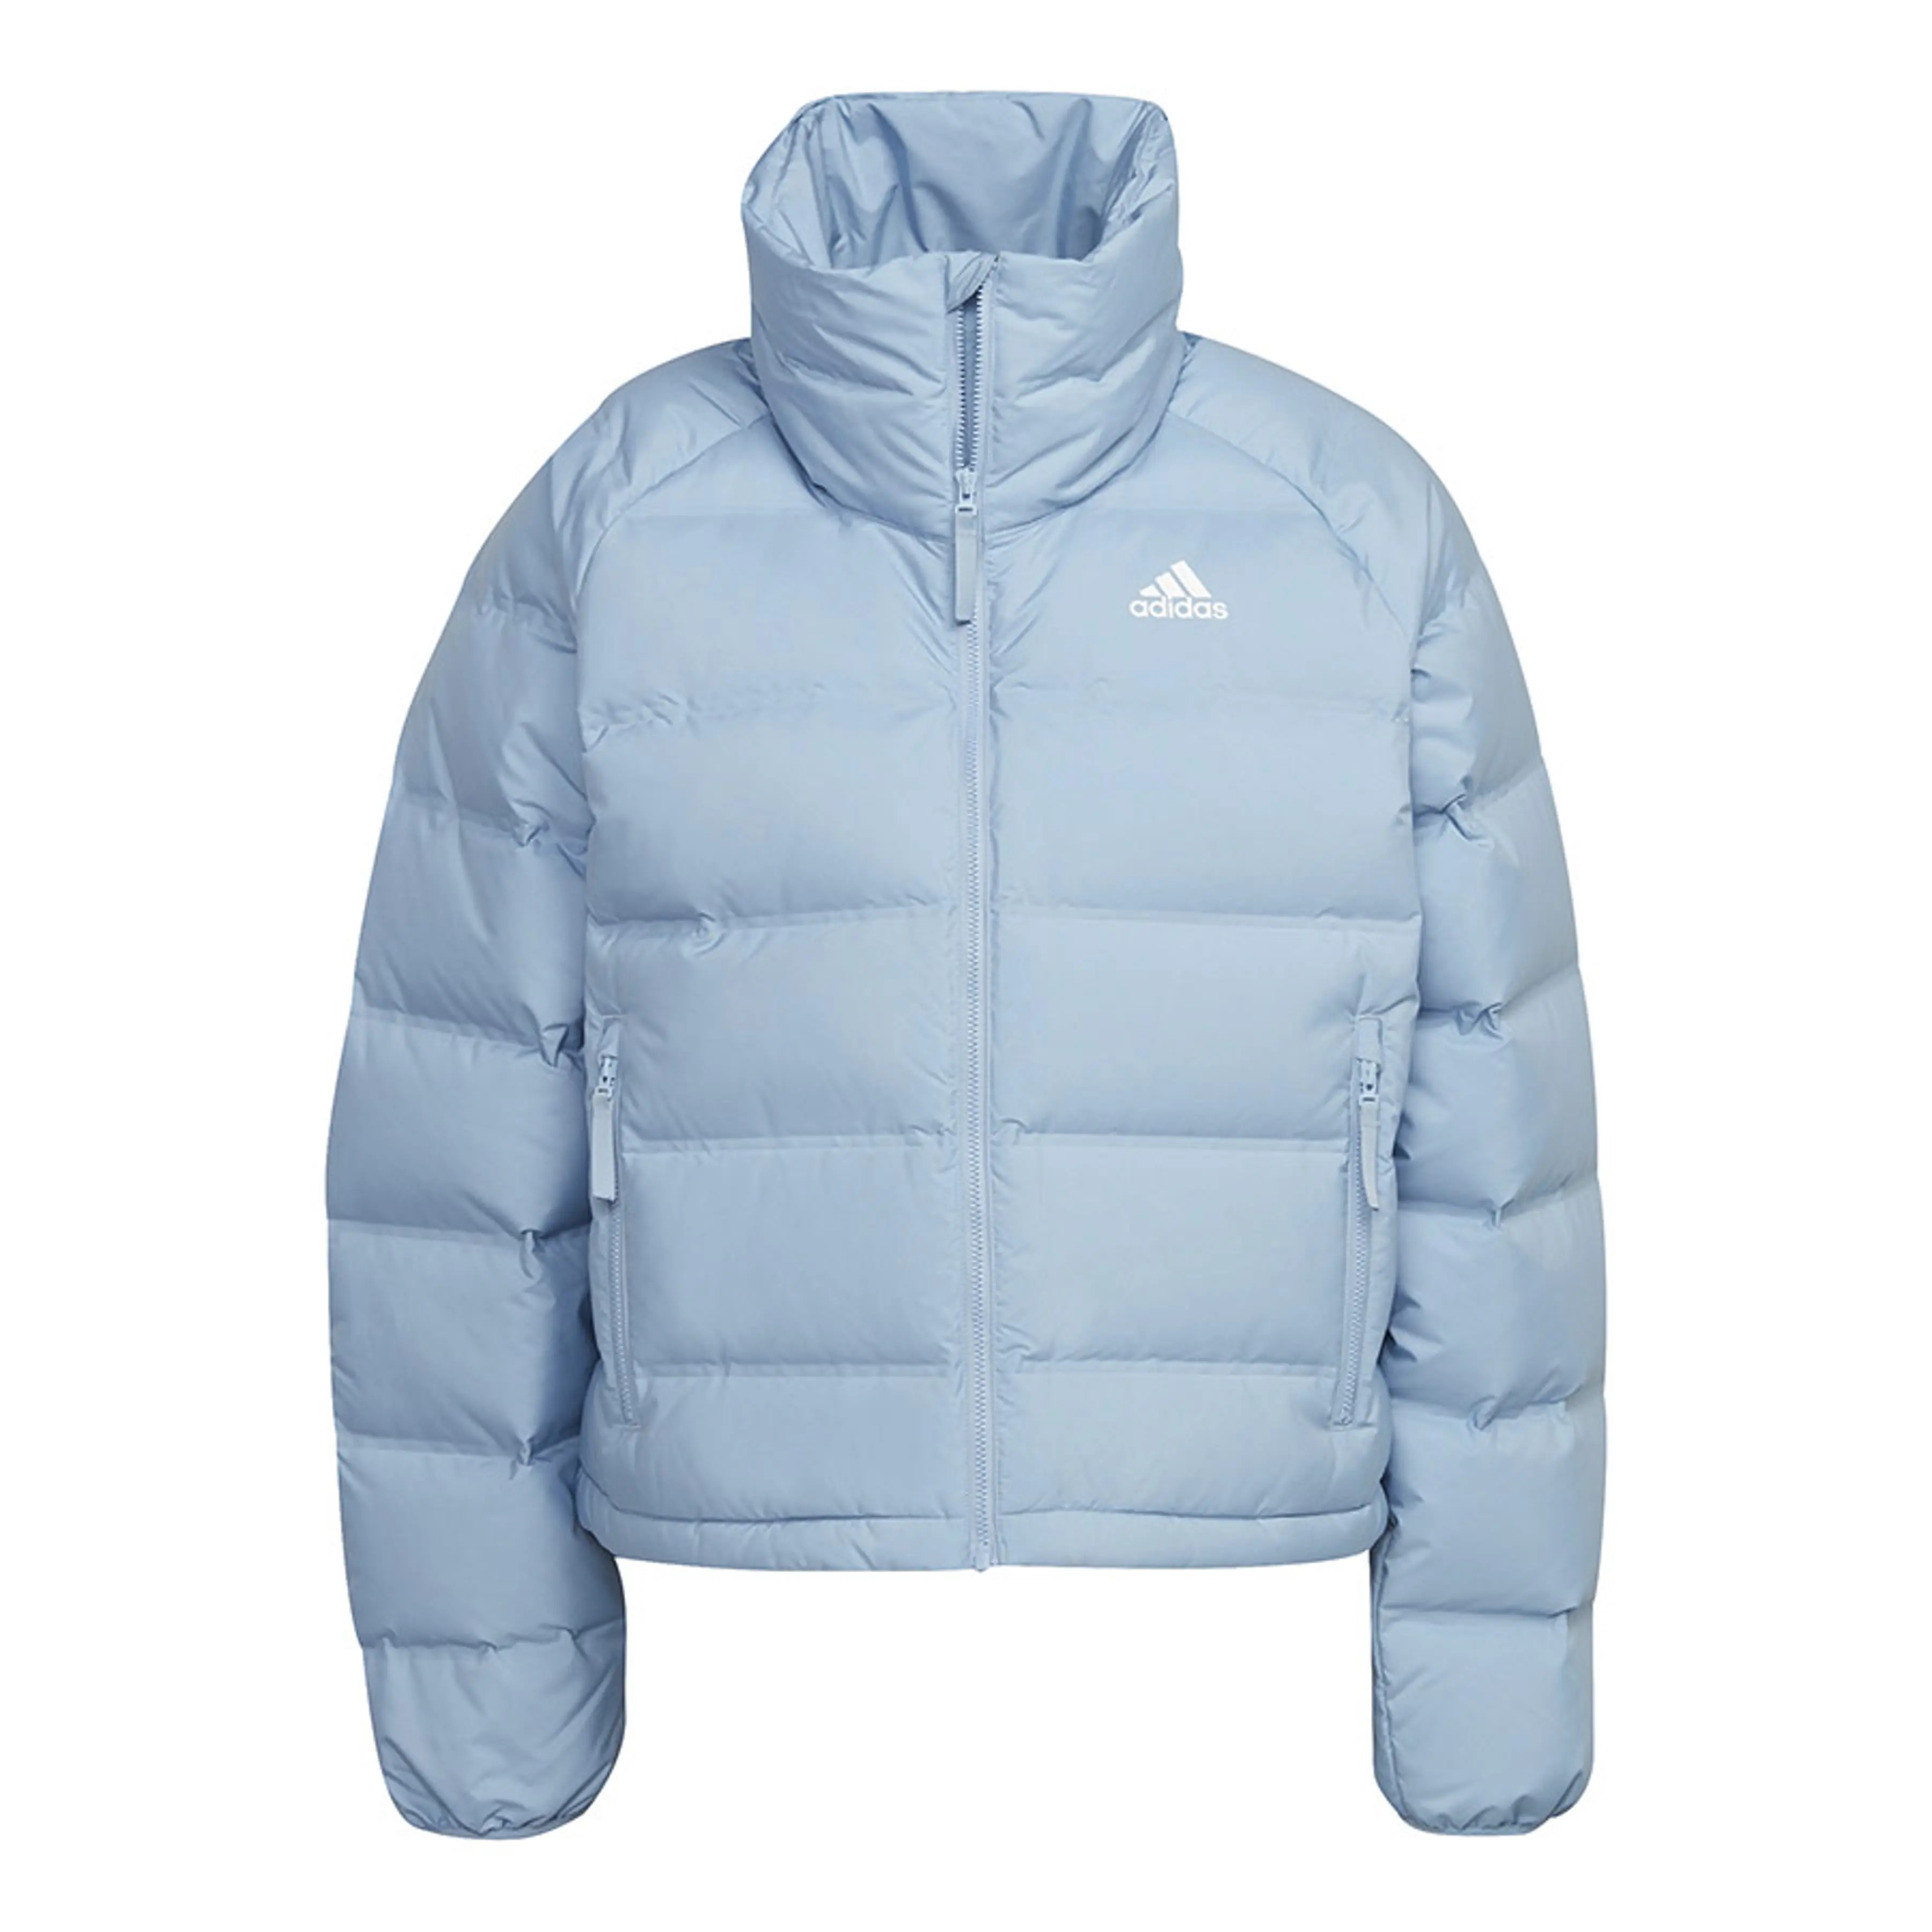 Adidas Women\'s Helionic Relaxed Fit eBay | Ambient Down Sky Puffer Jacket